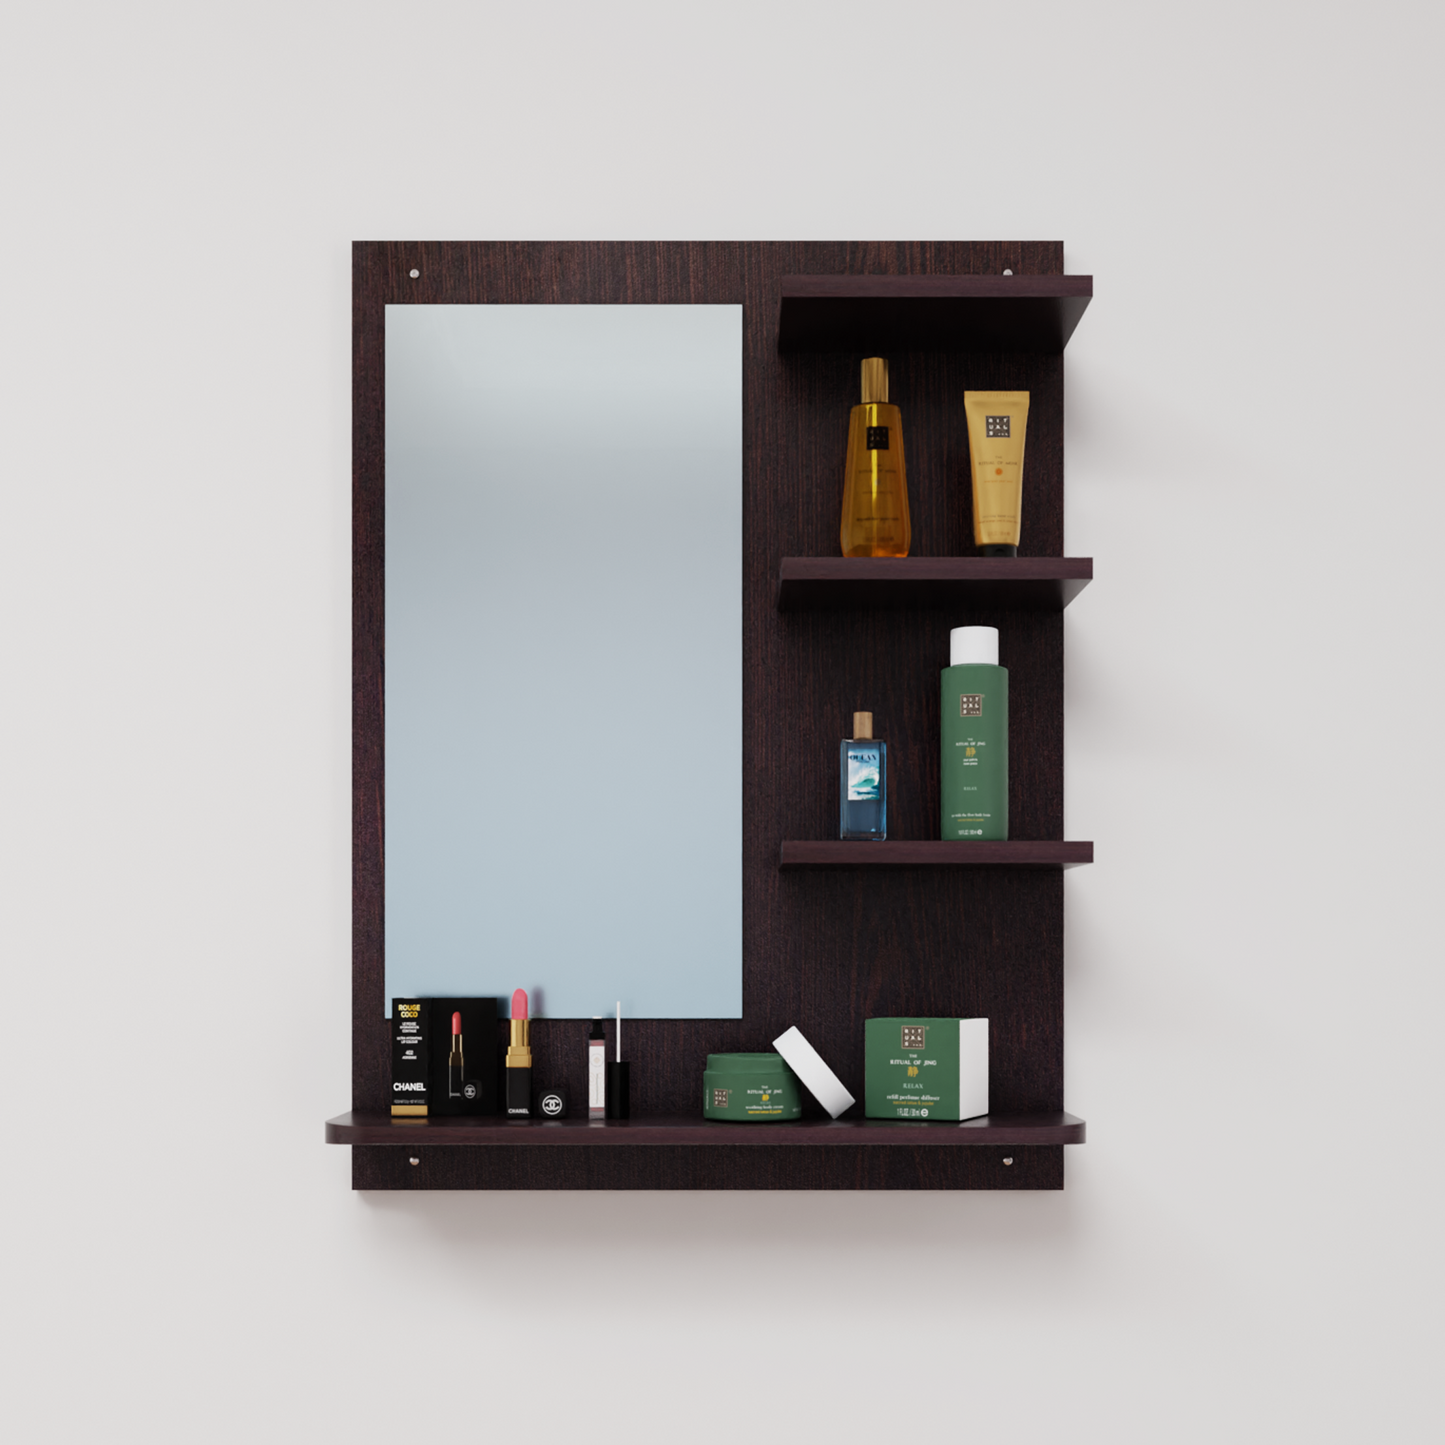 Dressing Table with Mirror | Open Shelves Dressing Table VIKI FURNITURE   